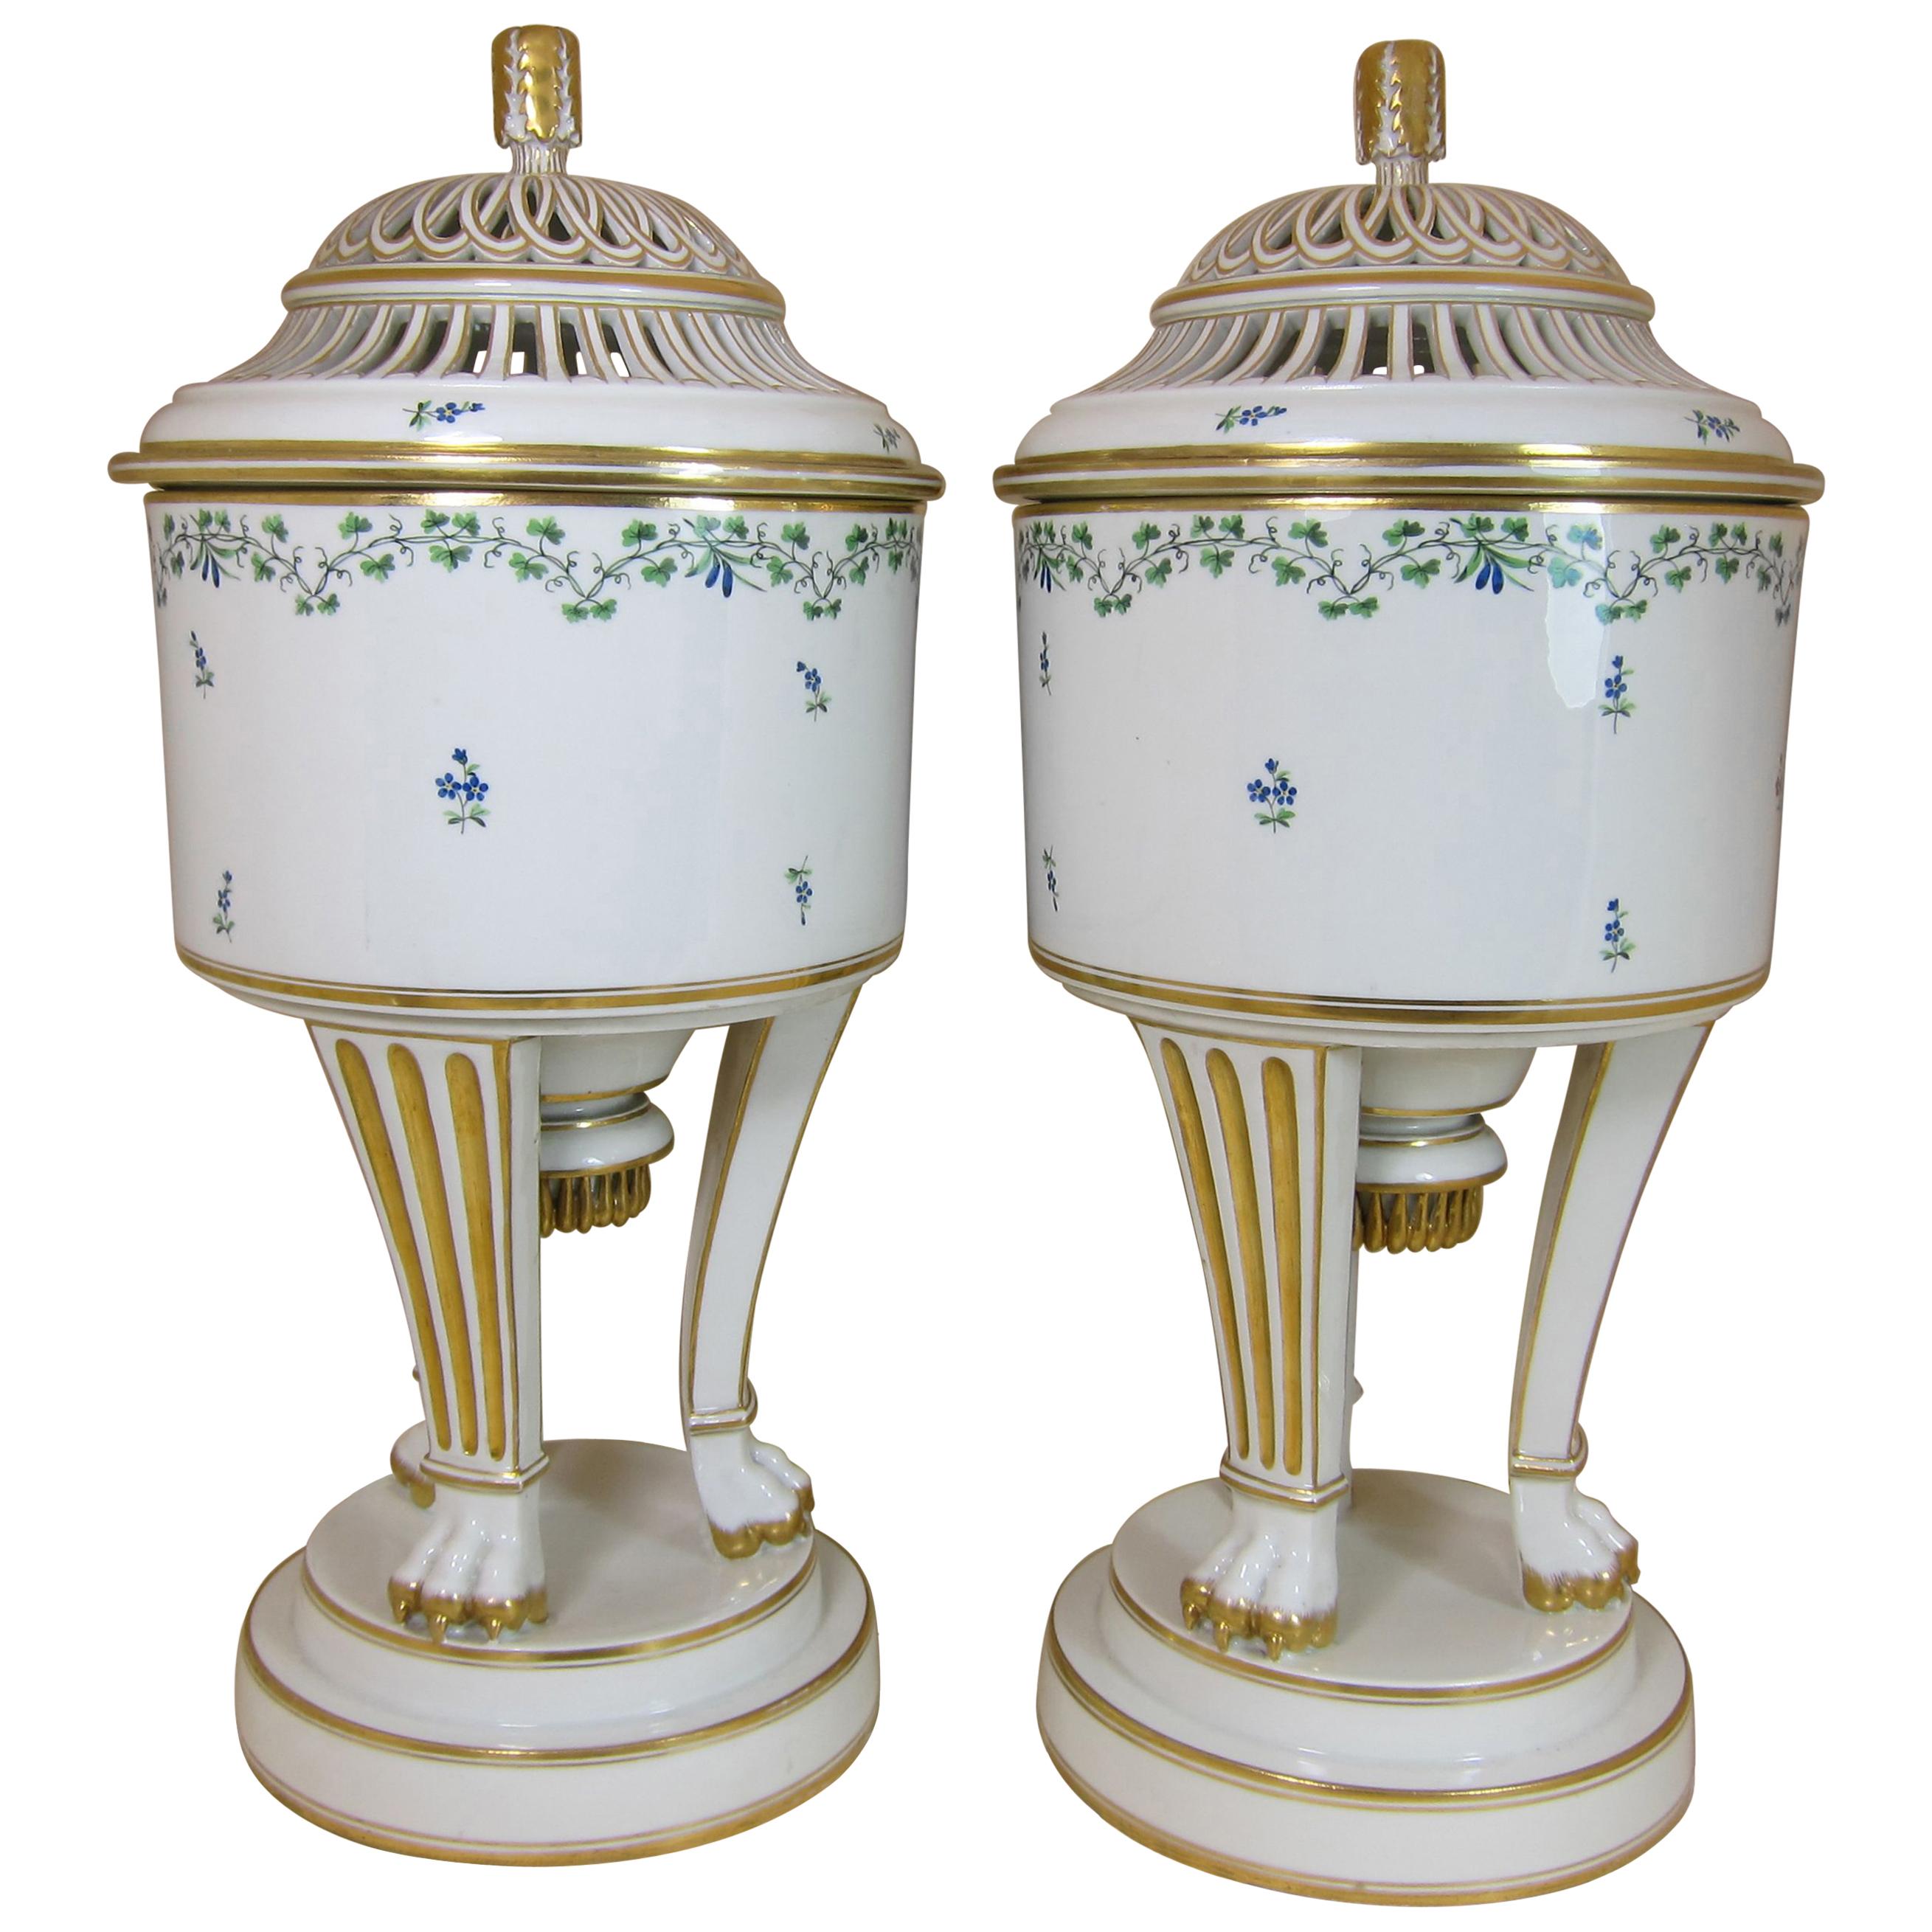 Antique Pair of Vienna Porcelain Sprig Decorated Ice Pails, Lids and Liners For Sale